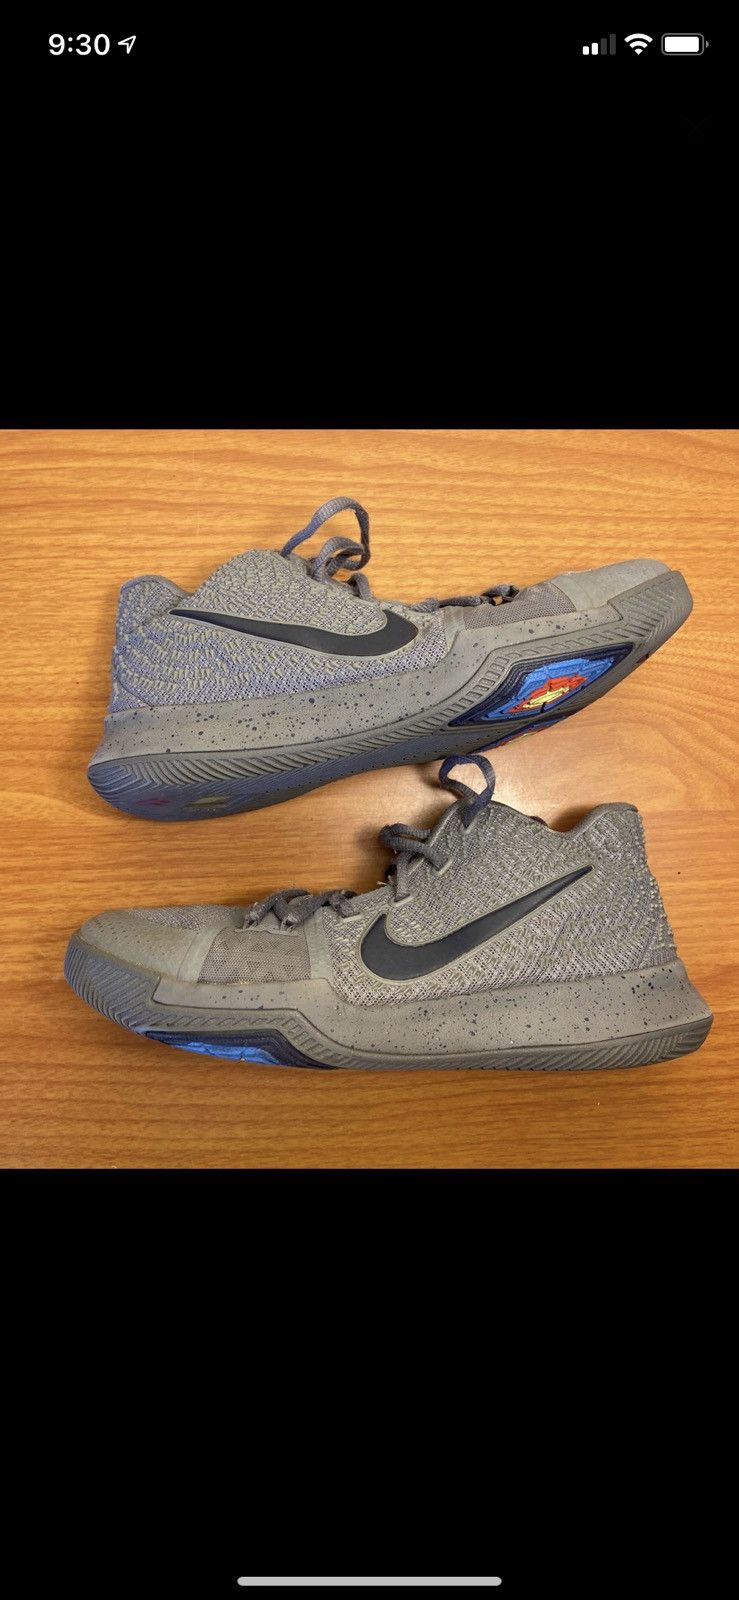 Nike Kyrie 3 Cool Grey Size US 6.5 / EU 39-40 - 2 Preview